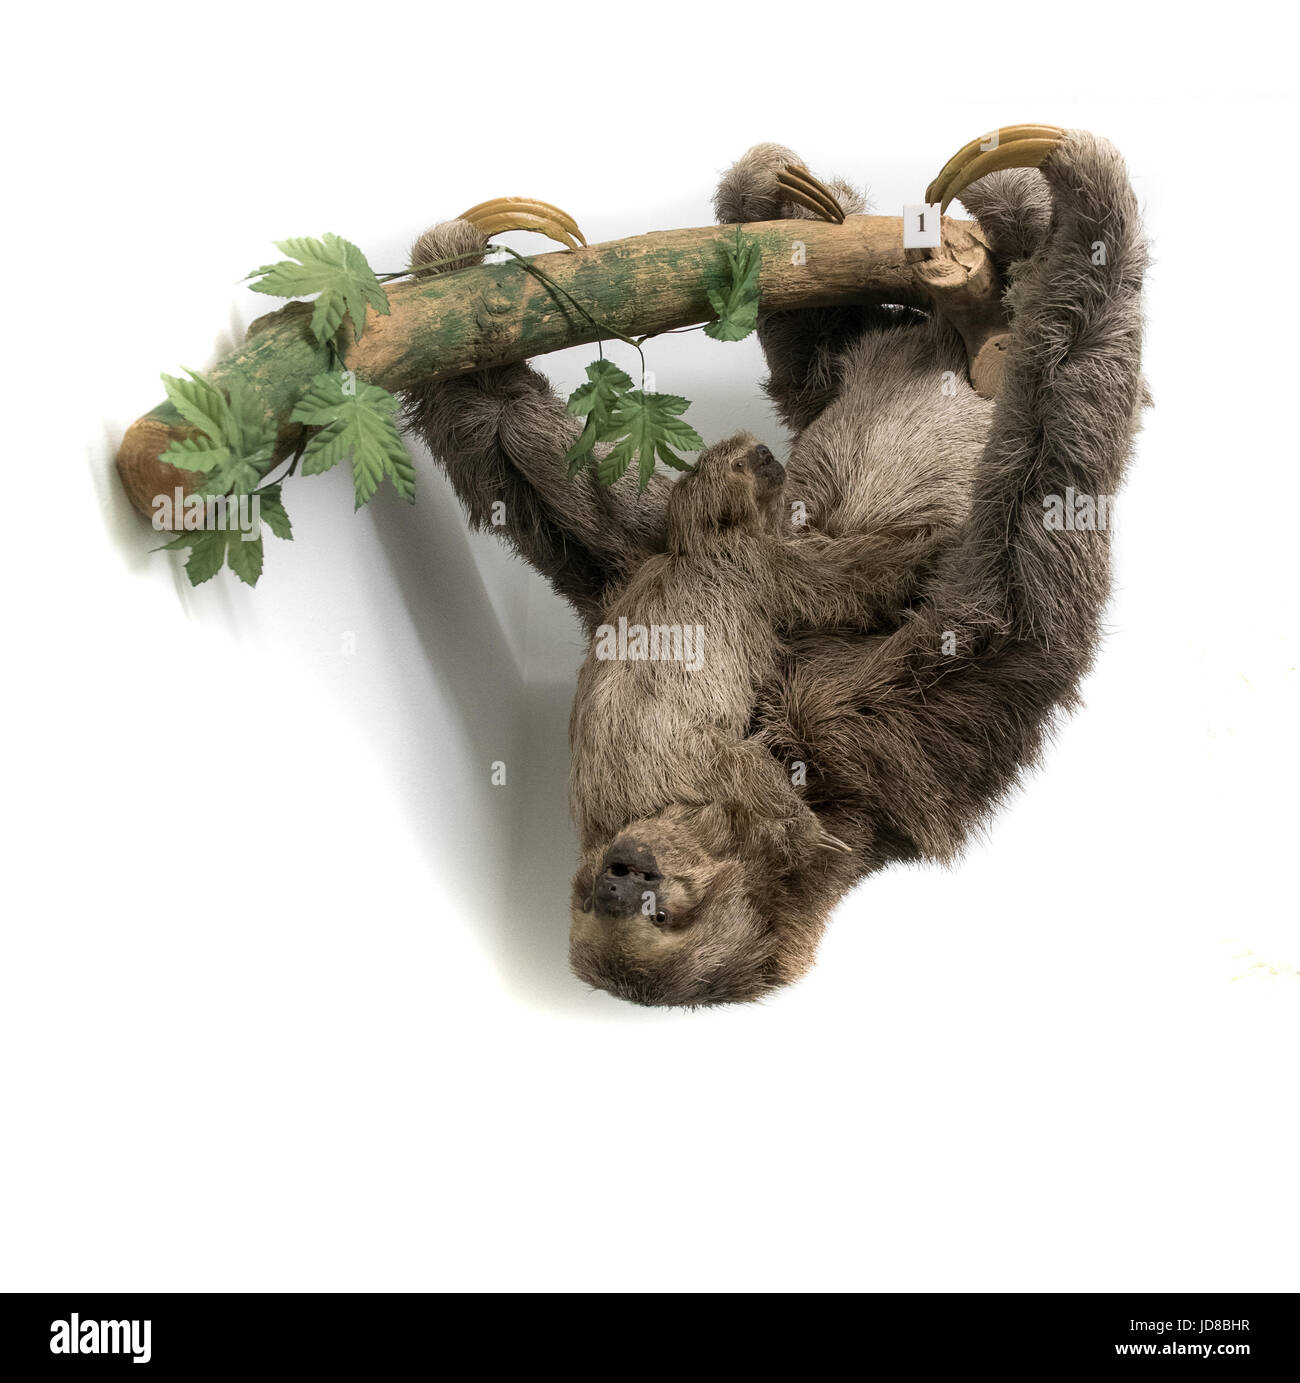 Sloth hanging upside down from branch against plain white background, studio shot. stuffed animal isolated colour picture Stock Photo